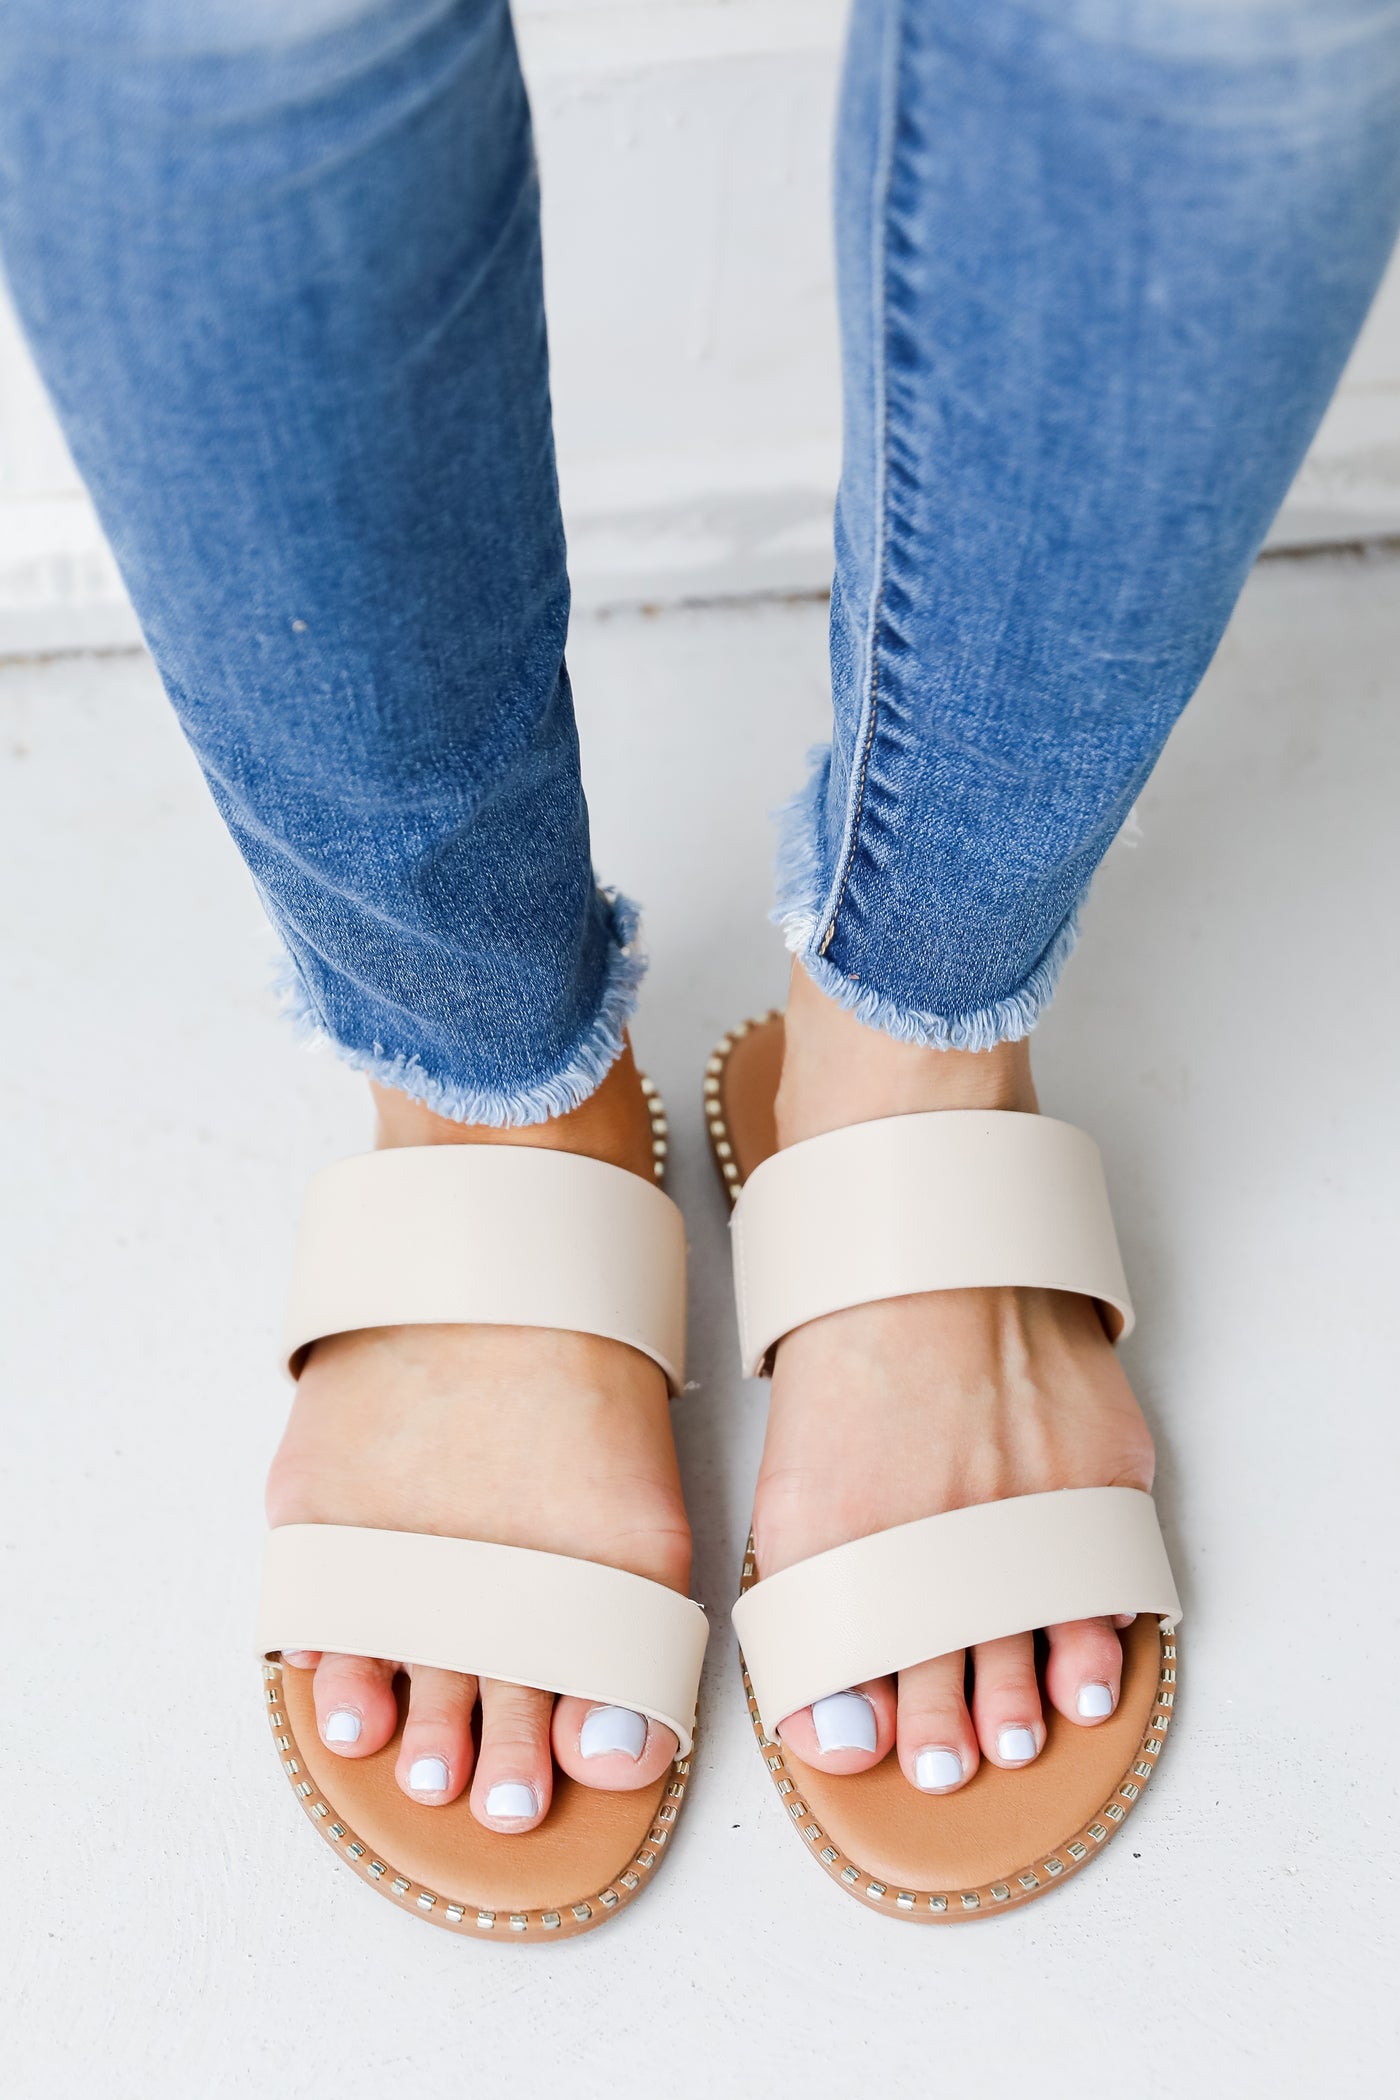 Double Strap Sandals in ivory on model